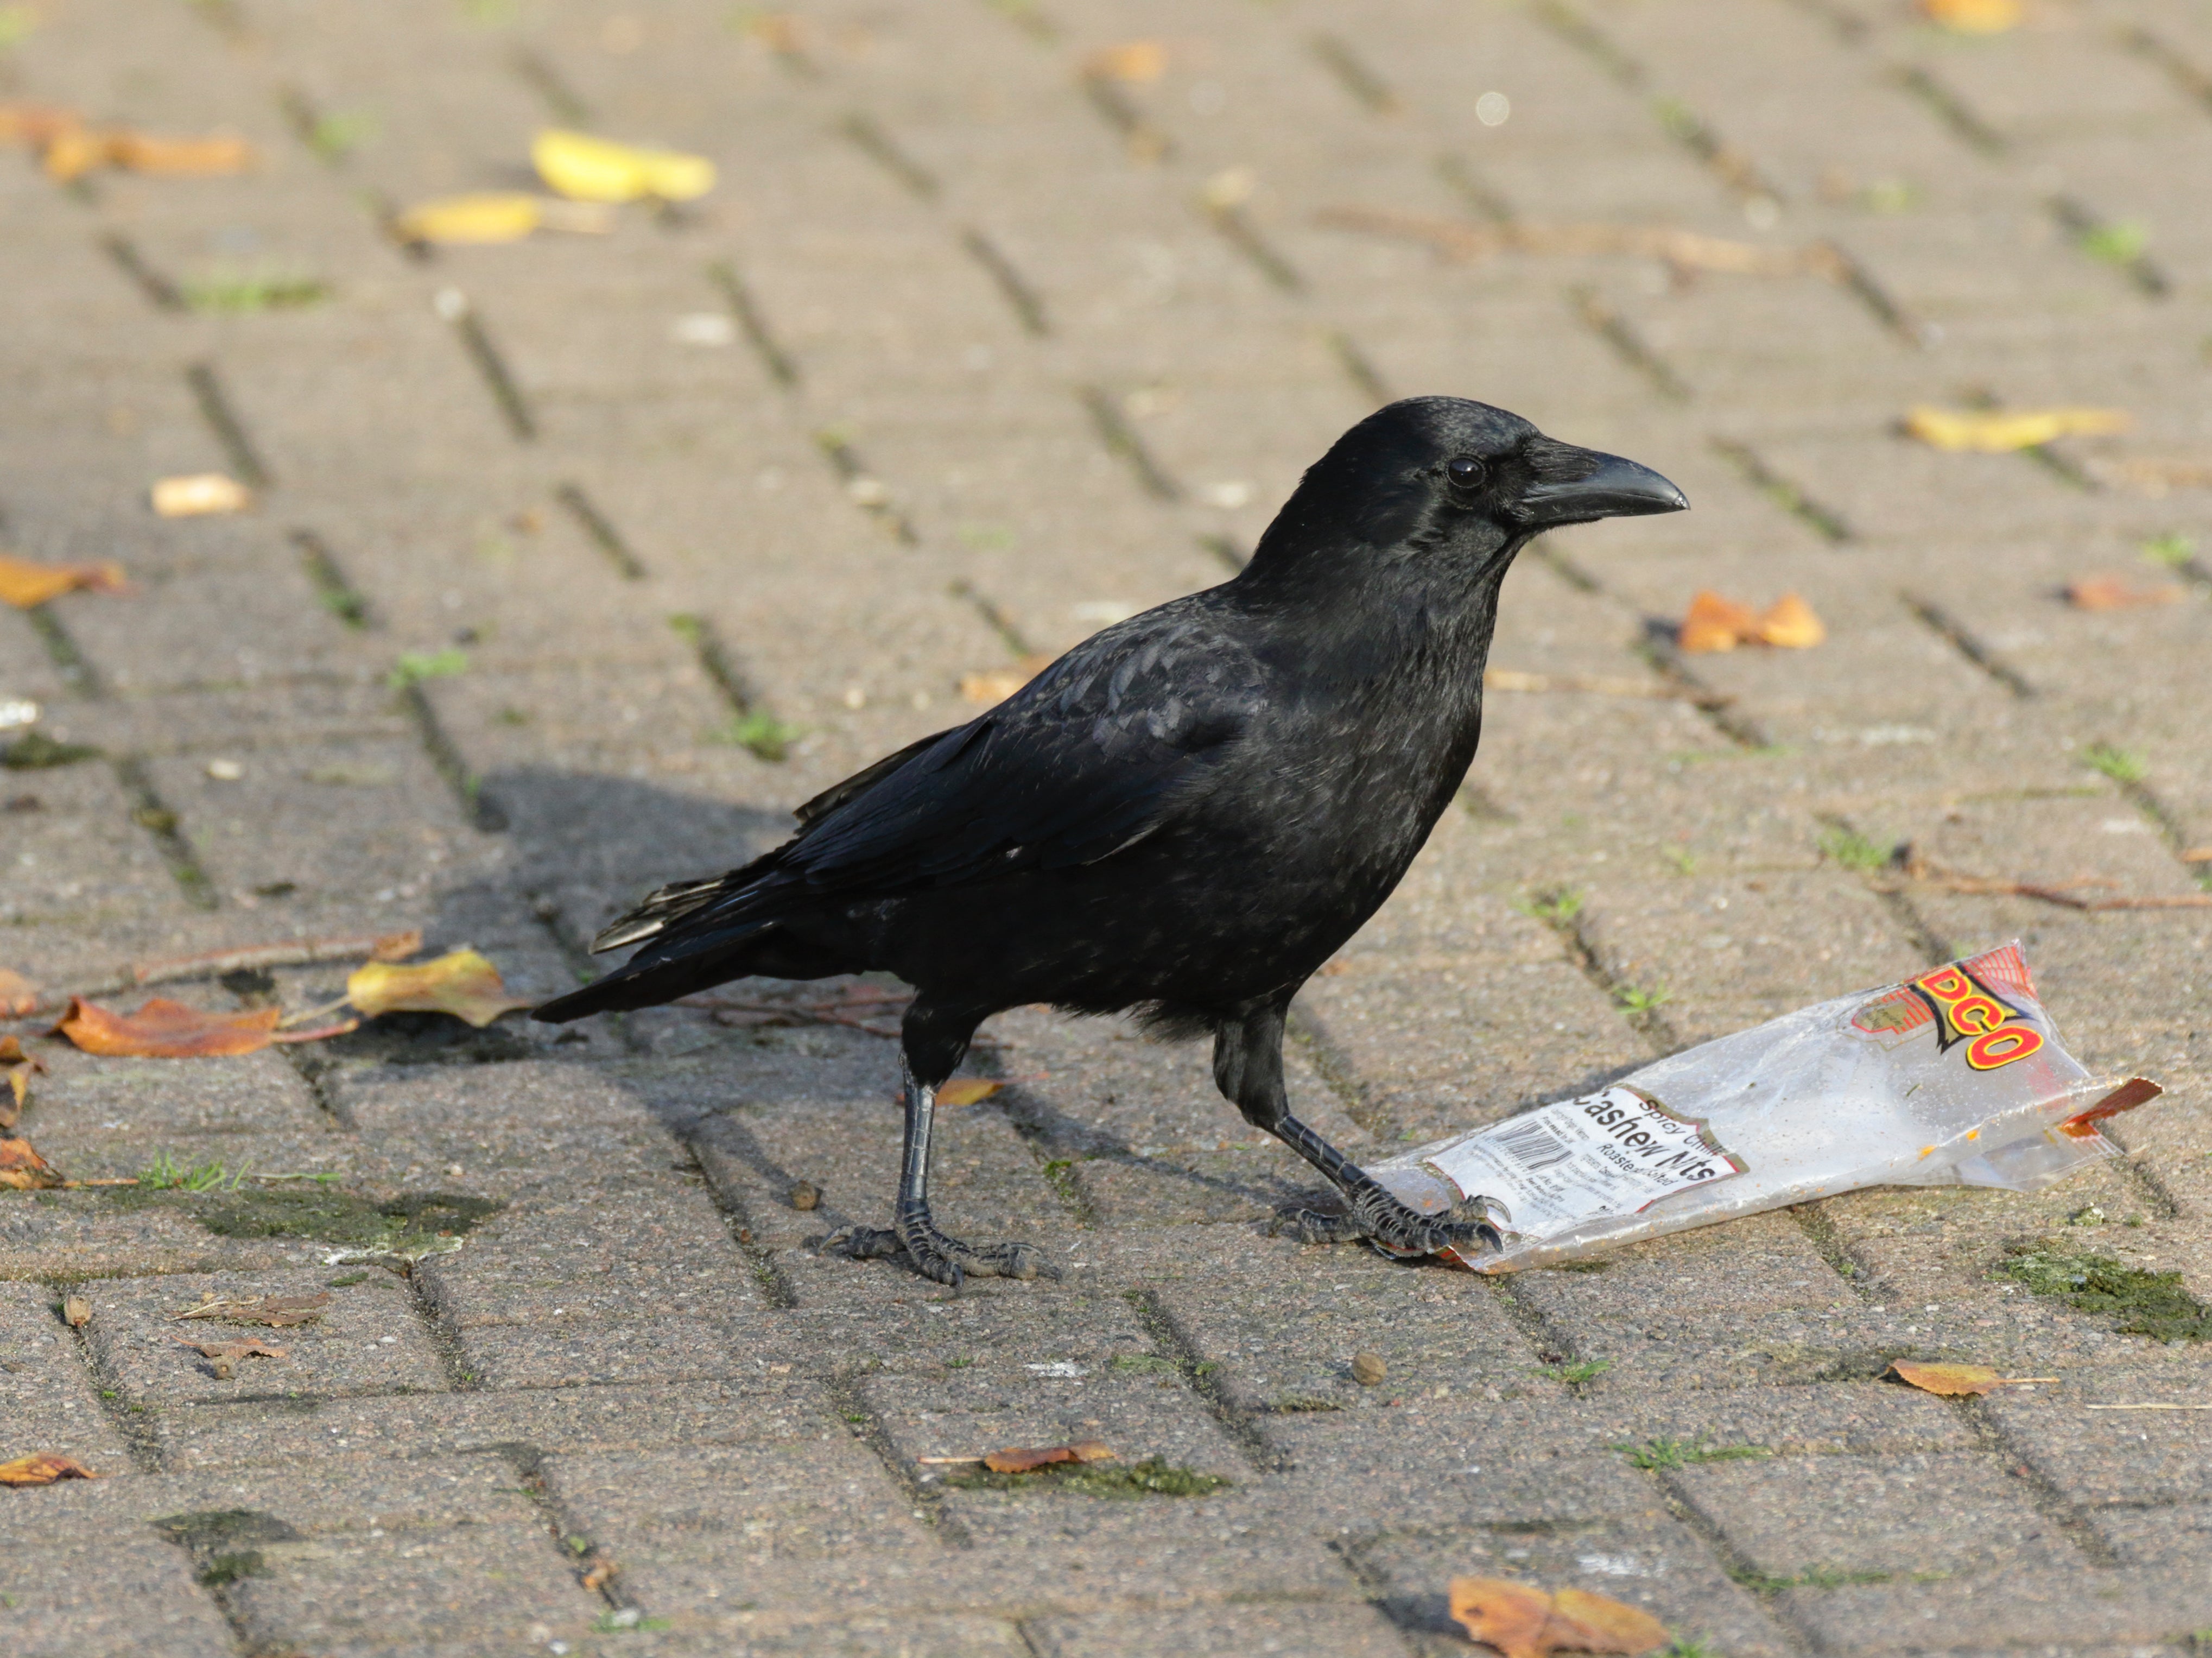 An estimated 1,000 crows live in Sunnyvale, California